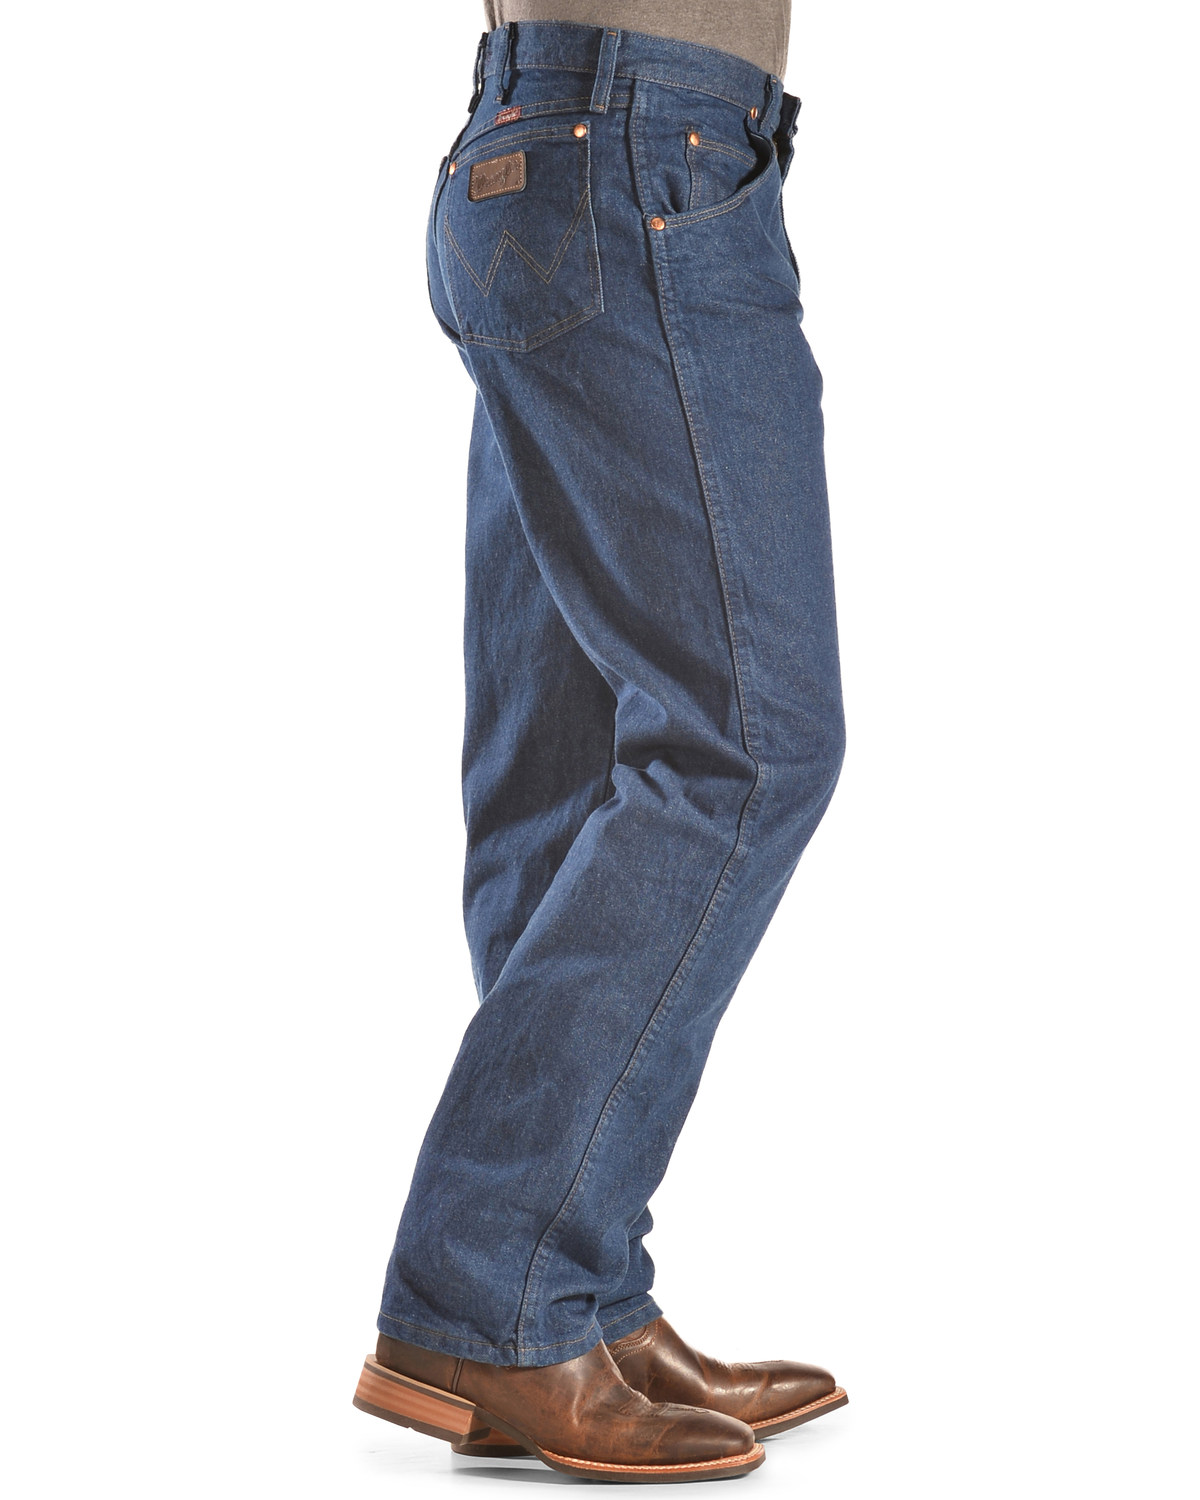 Wrangler 31MWZ Cowboy Cut Relaxed Fit Prewashed Jeans | Boot Barn